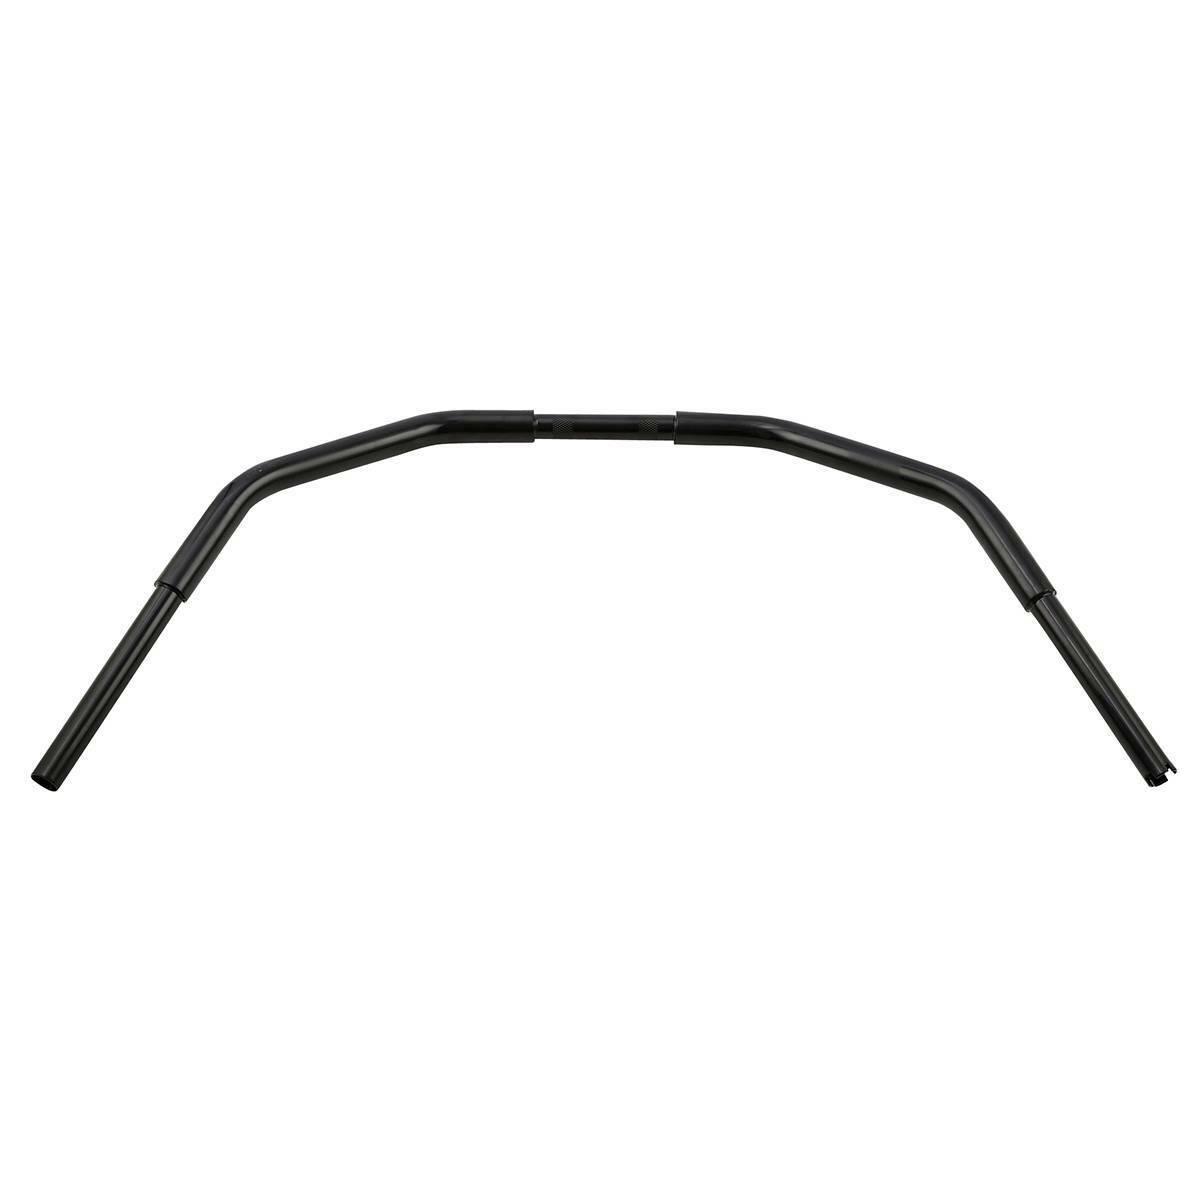 3.5" Rise Fat Beach HandleBar Fit For Harley Touring Sportster XL Softail Dyna - Moto Life Products